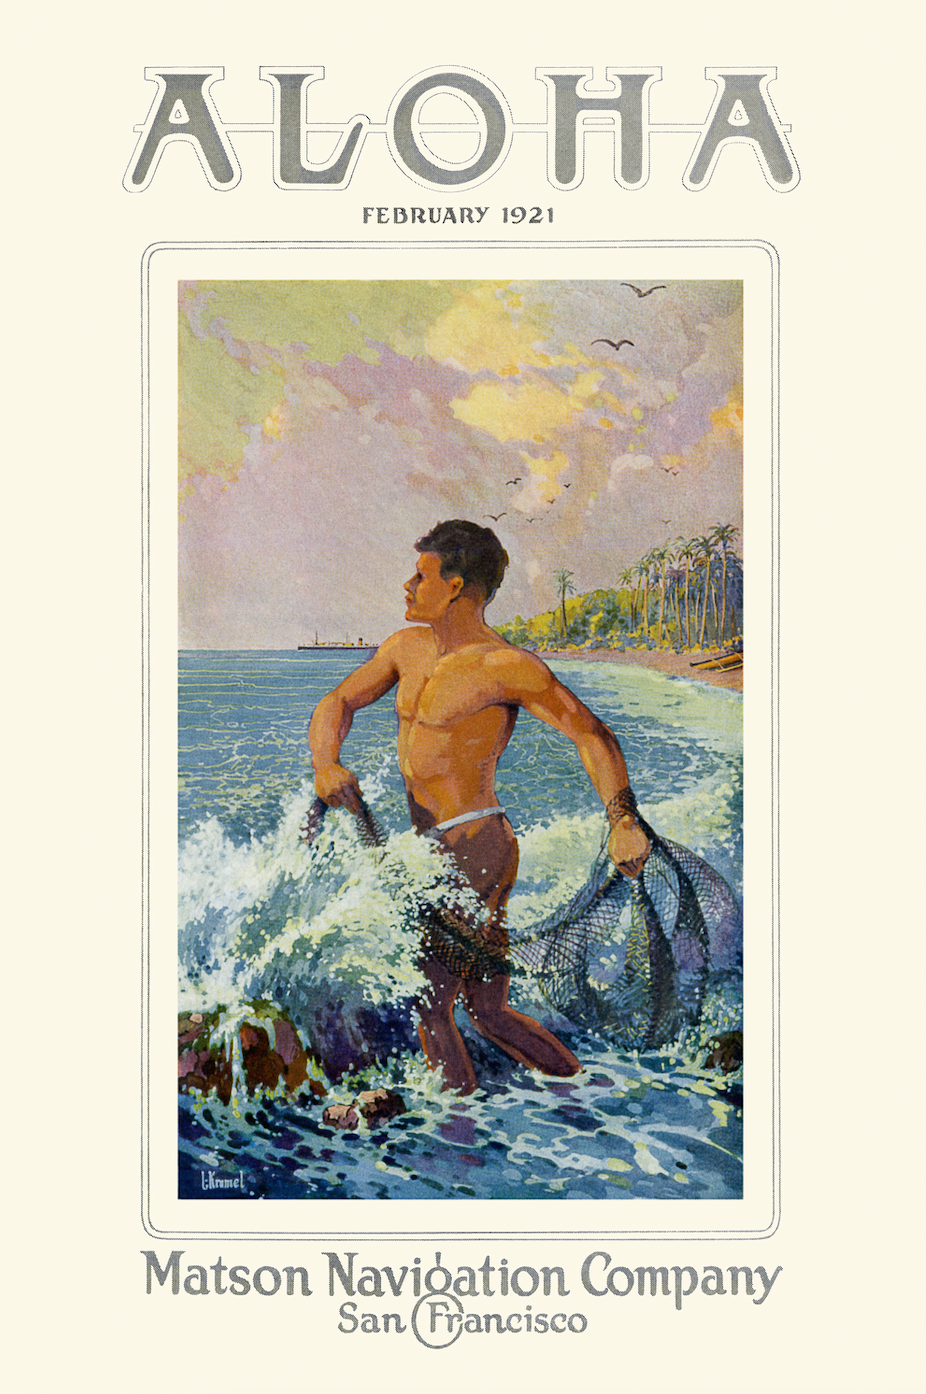 Colorful illustration of a native island man holding a fishing net standing in the waves on a shore. Aloha, February 1921 is written at the top and Matson Navigation Company San Francisco written under the picture. The background is off-white.